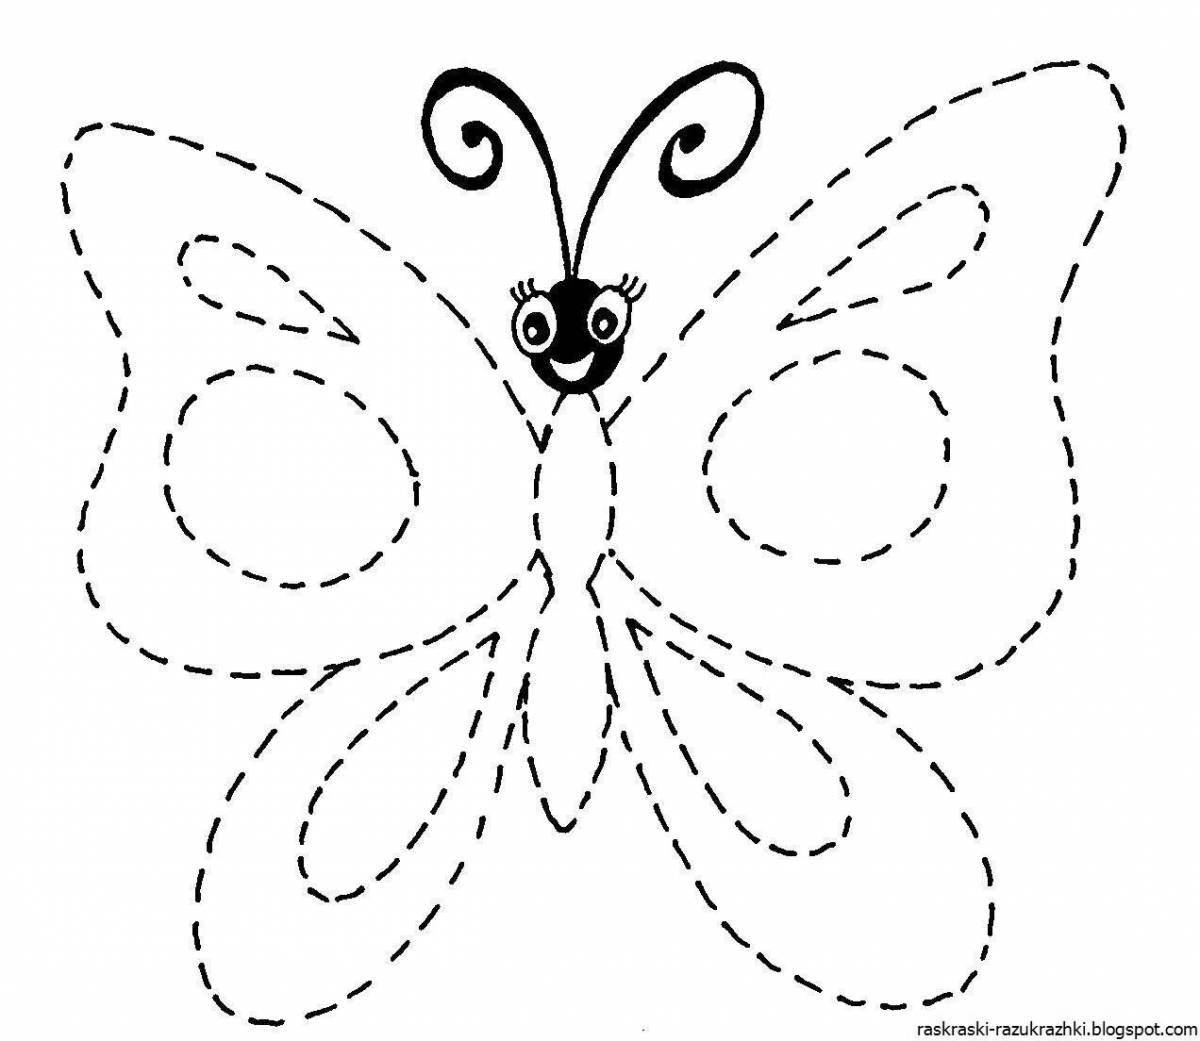 Outline coloring page for children 3-4 years old